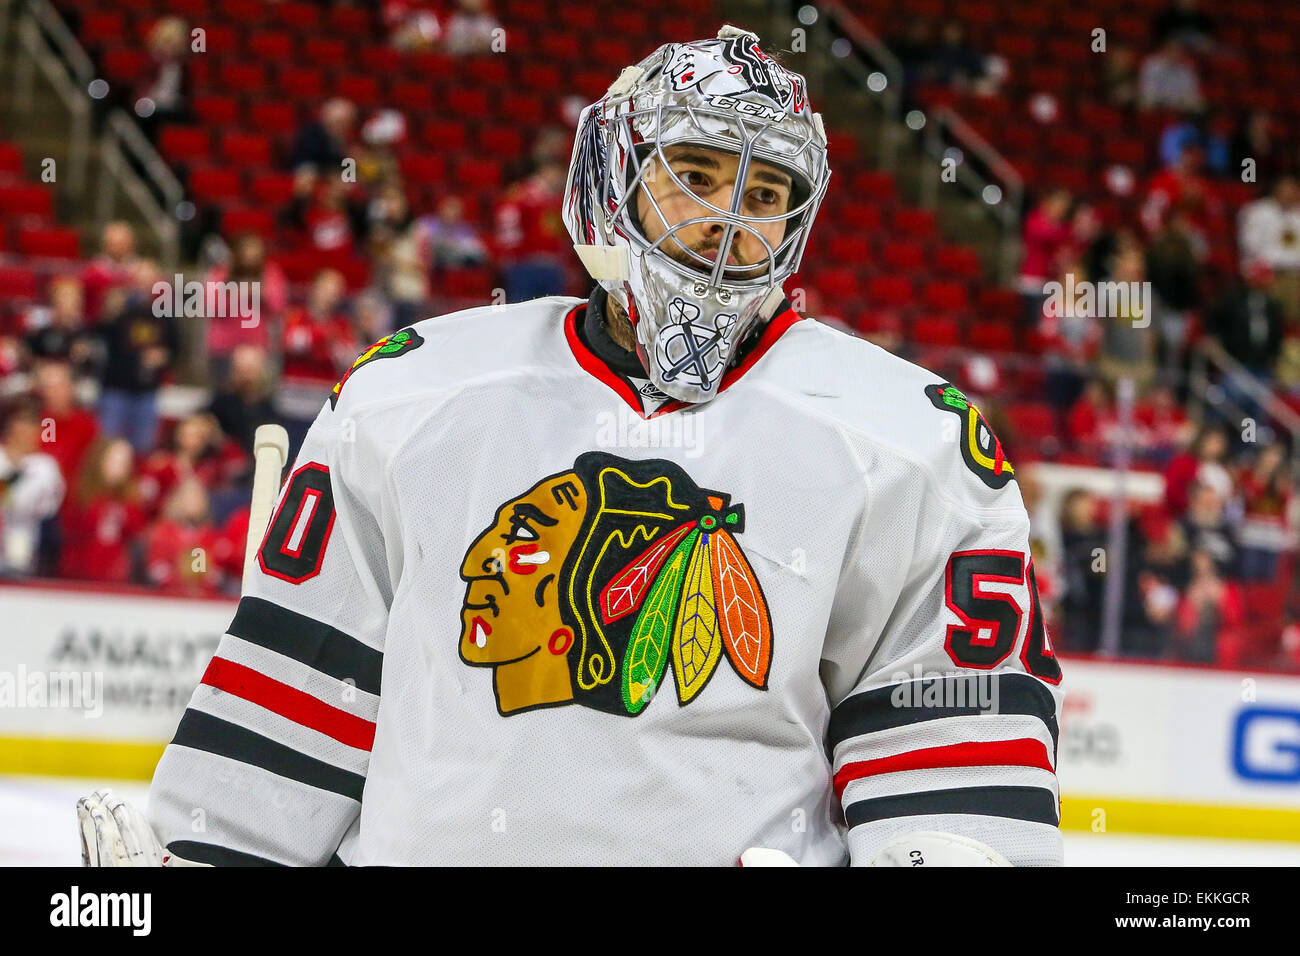 Corey Crawford hoists the Cup! #ONEGOAL  Chicago blackhawks hockey,  Chicago blackhawks, Blackhawks hockey